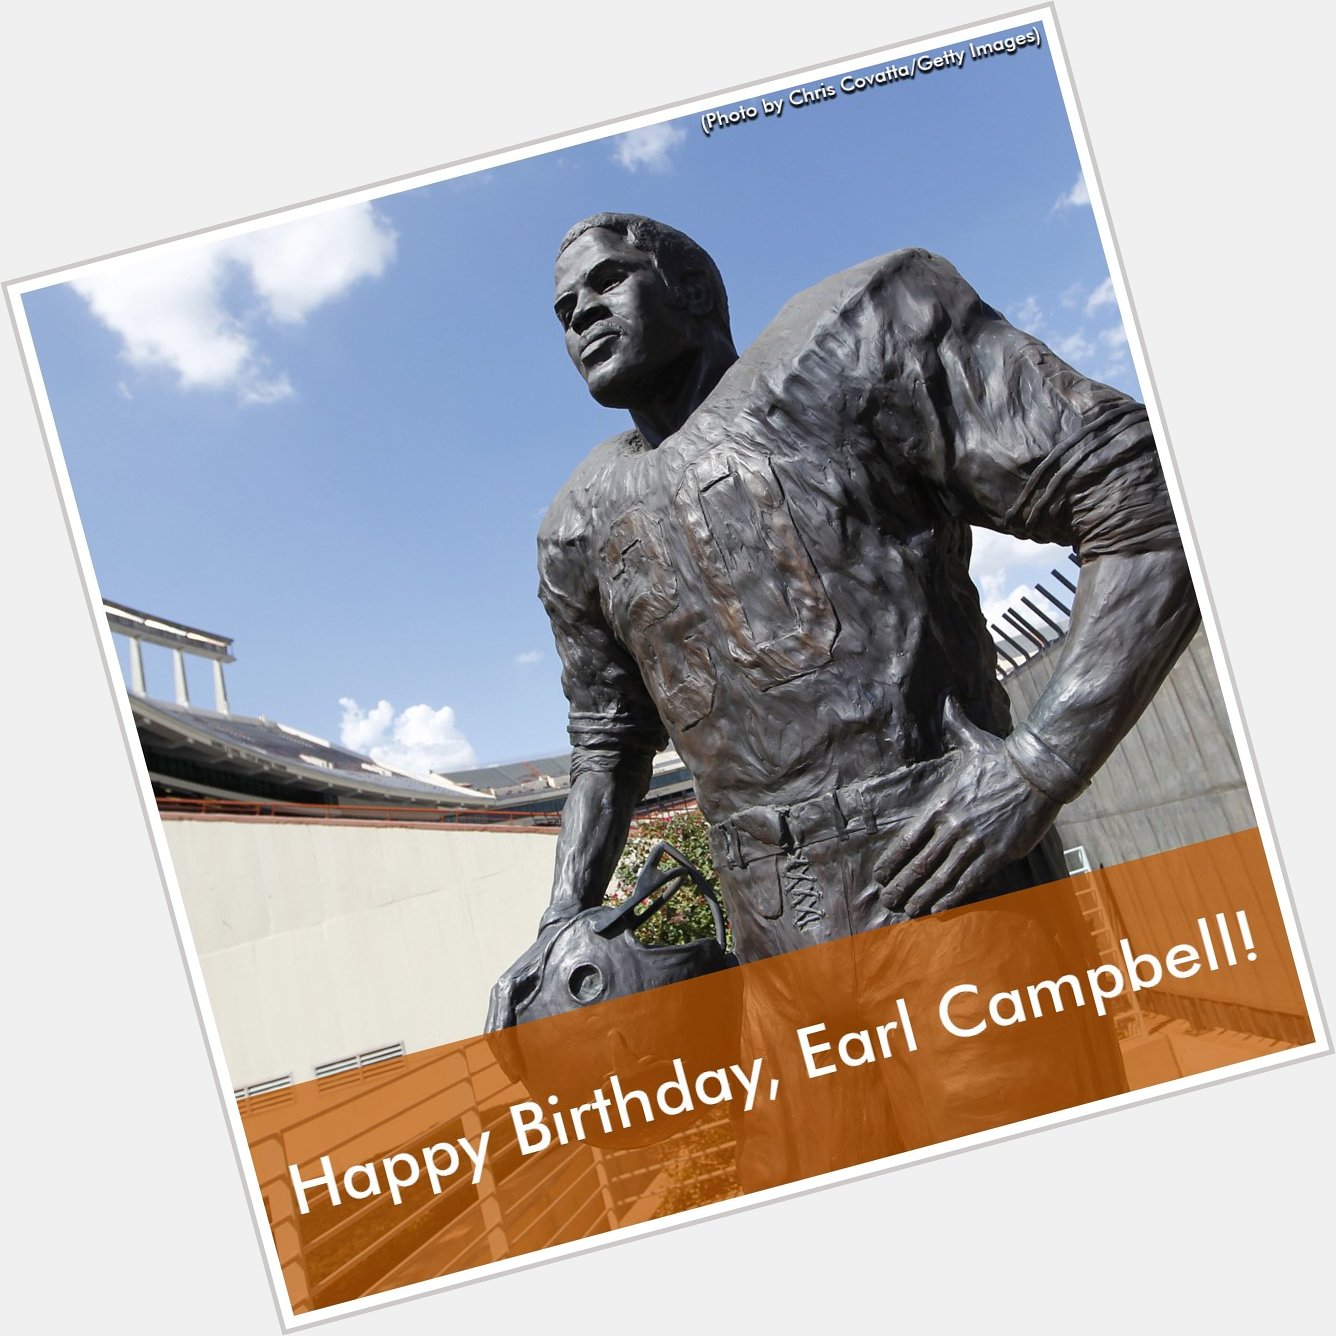 Happy birthday, Earl Campbell! The Longhorns legend and Pro Football Hall of Famer turns 64 today!  